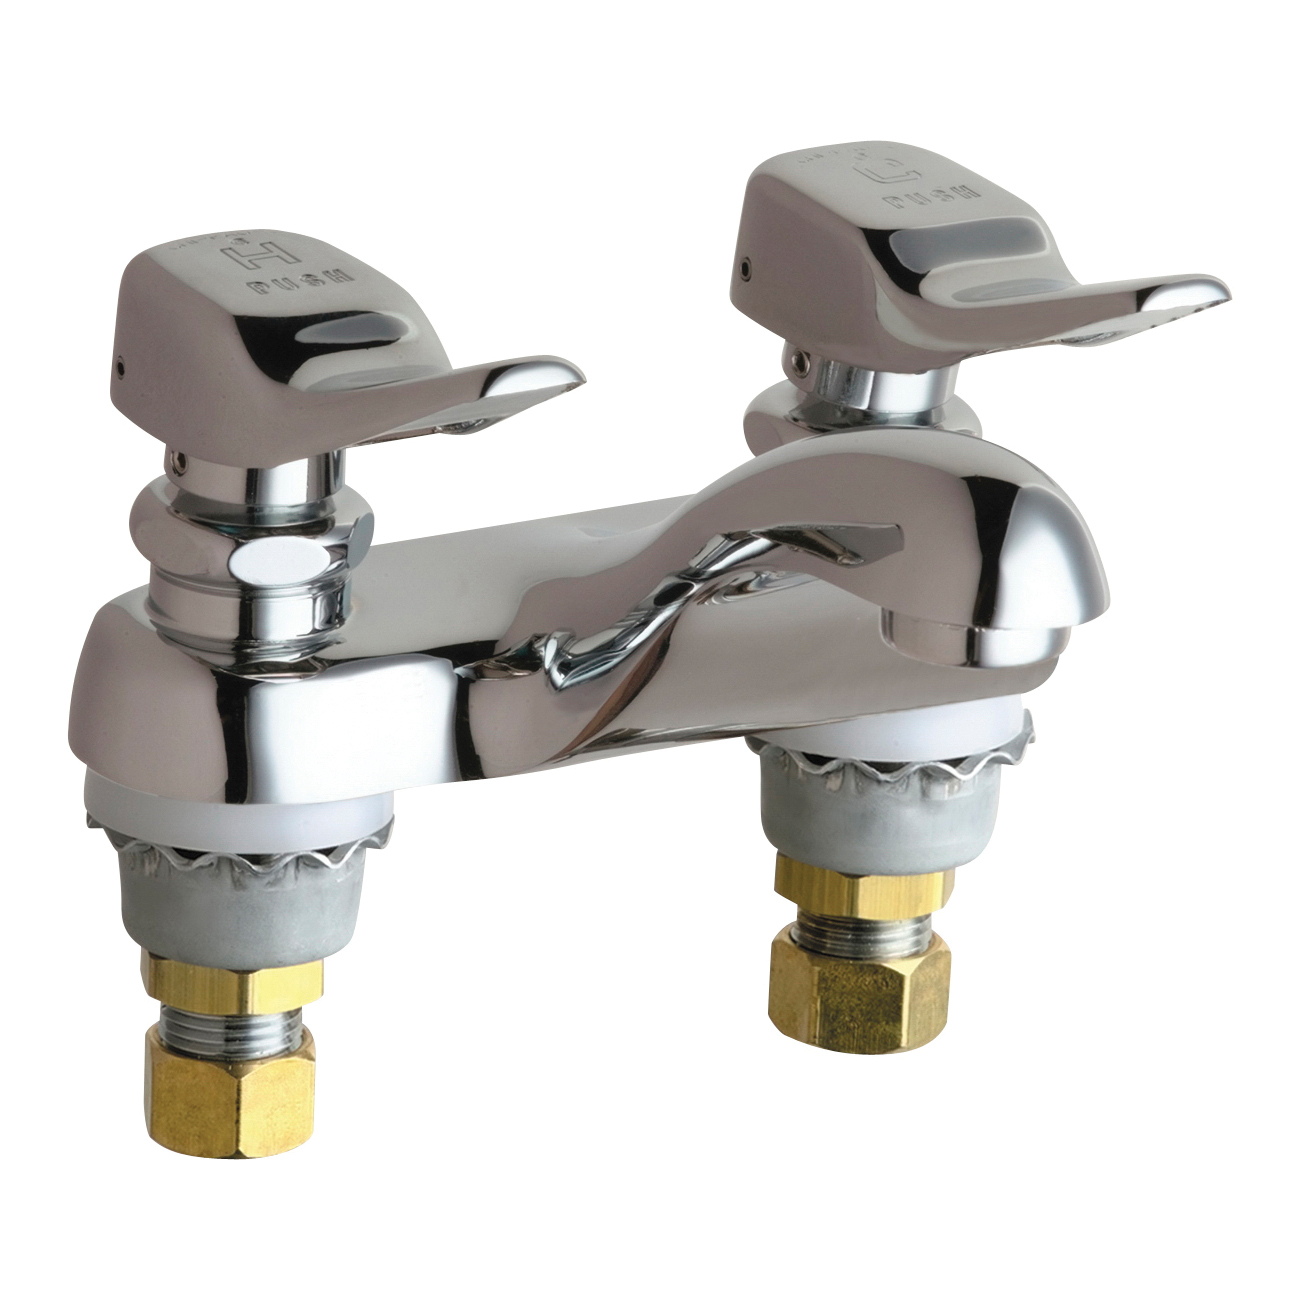 Chicago Faucet® 802-336ABCP Lavatory Sink Faucet, Chrome Plated, 2 Handles, 2.2 gpm